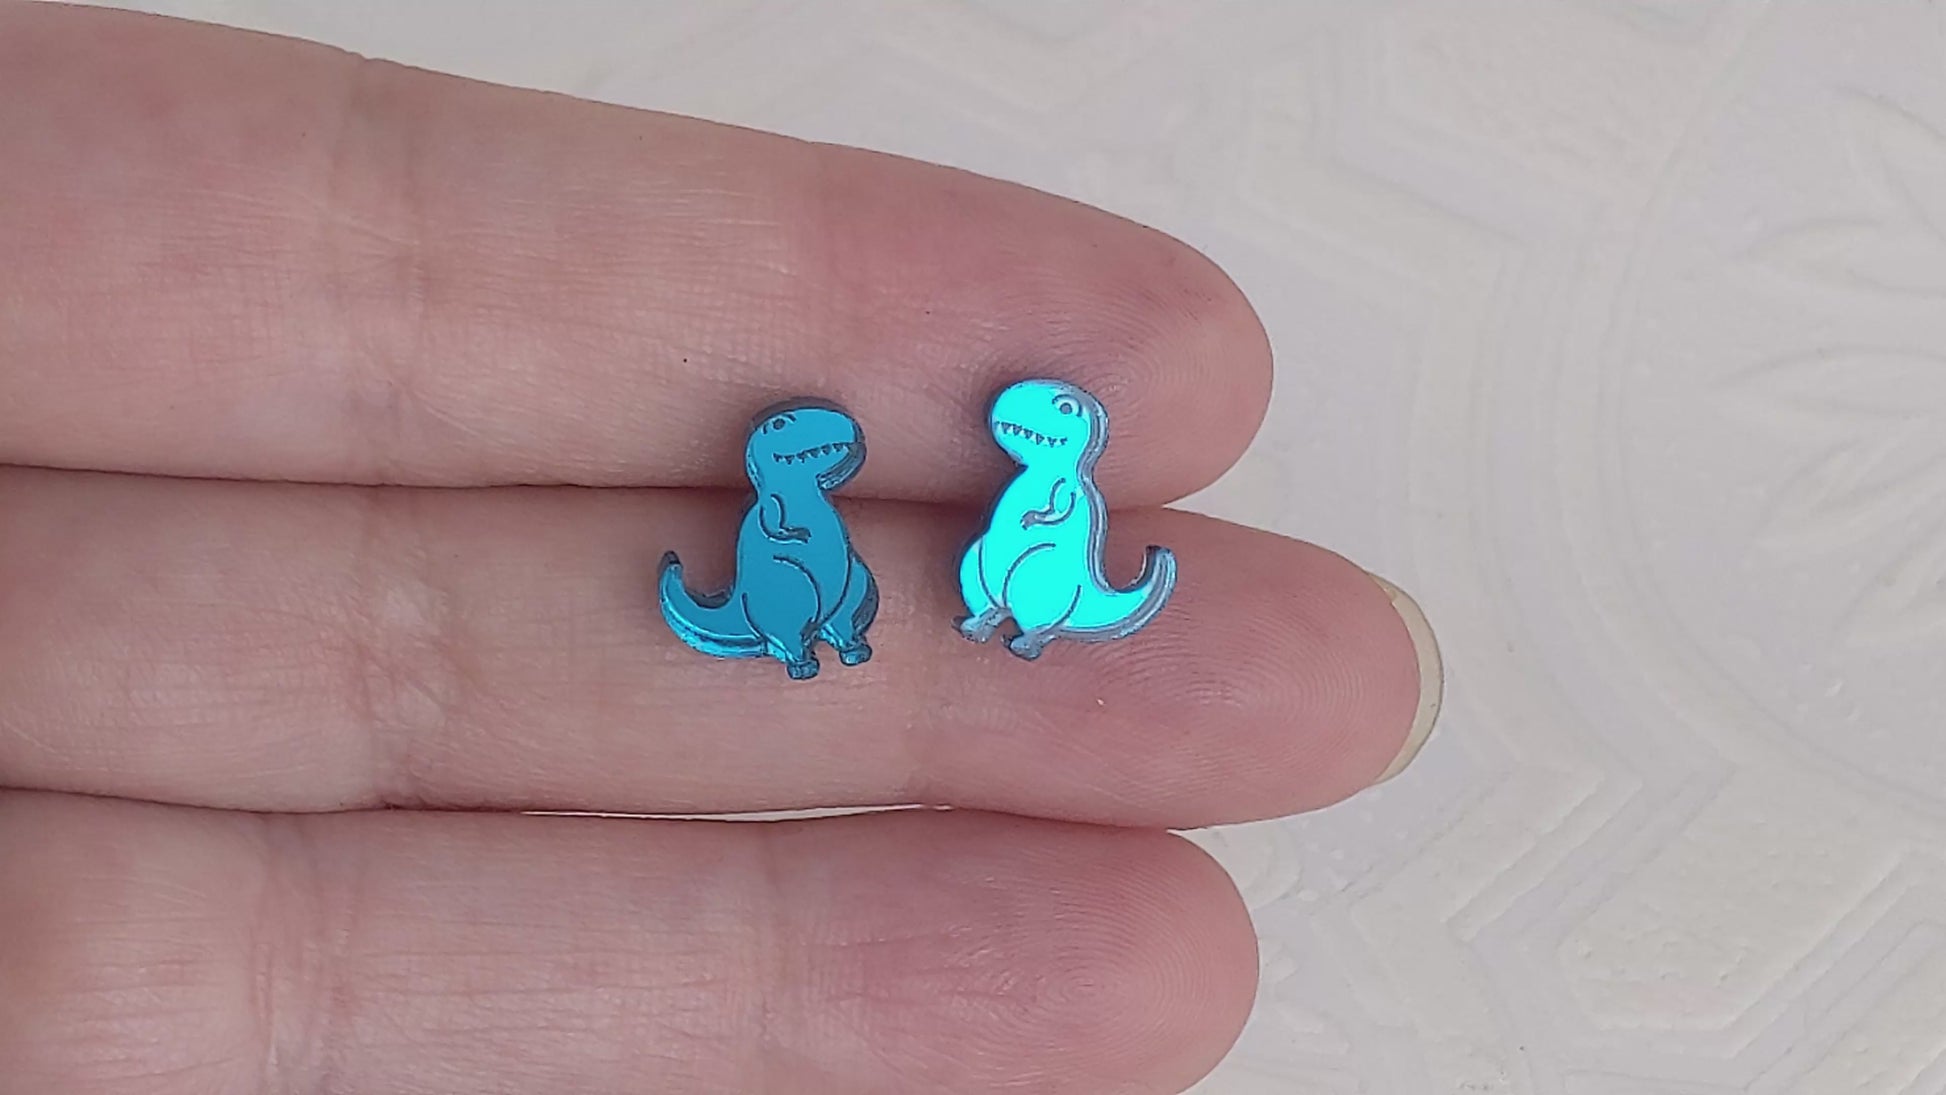 Video of Cartoon Tyrannosaurus Rex stud earrings in teal mirrored acrylic being held between two fingers.  They are being slowly moved to show how the light reflects off the mirrored surface.  By Isette.